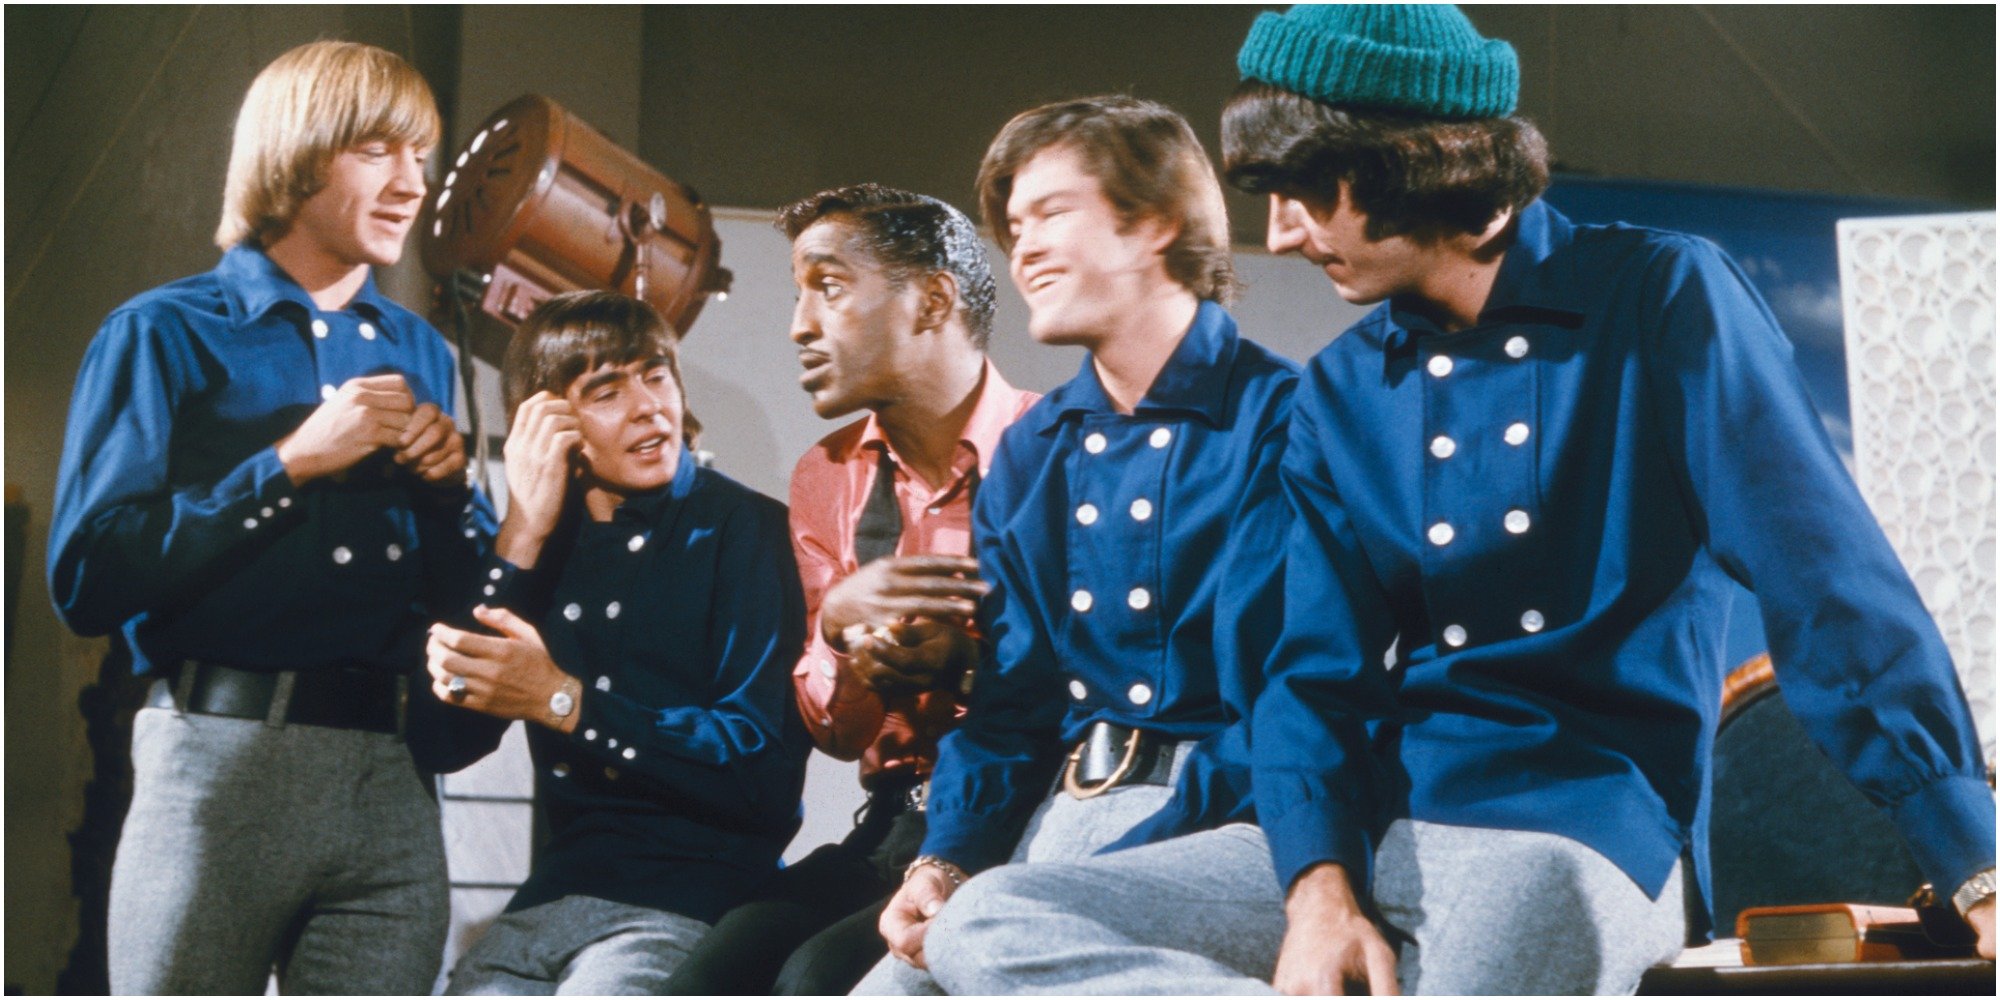 The Monkees and Sammy Davis Jr. on the set of "The Monkees."